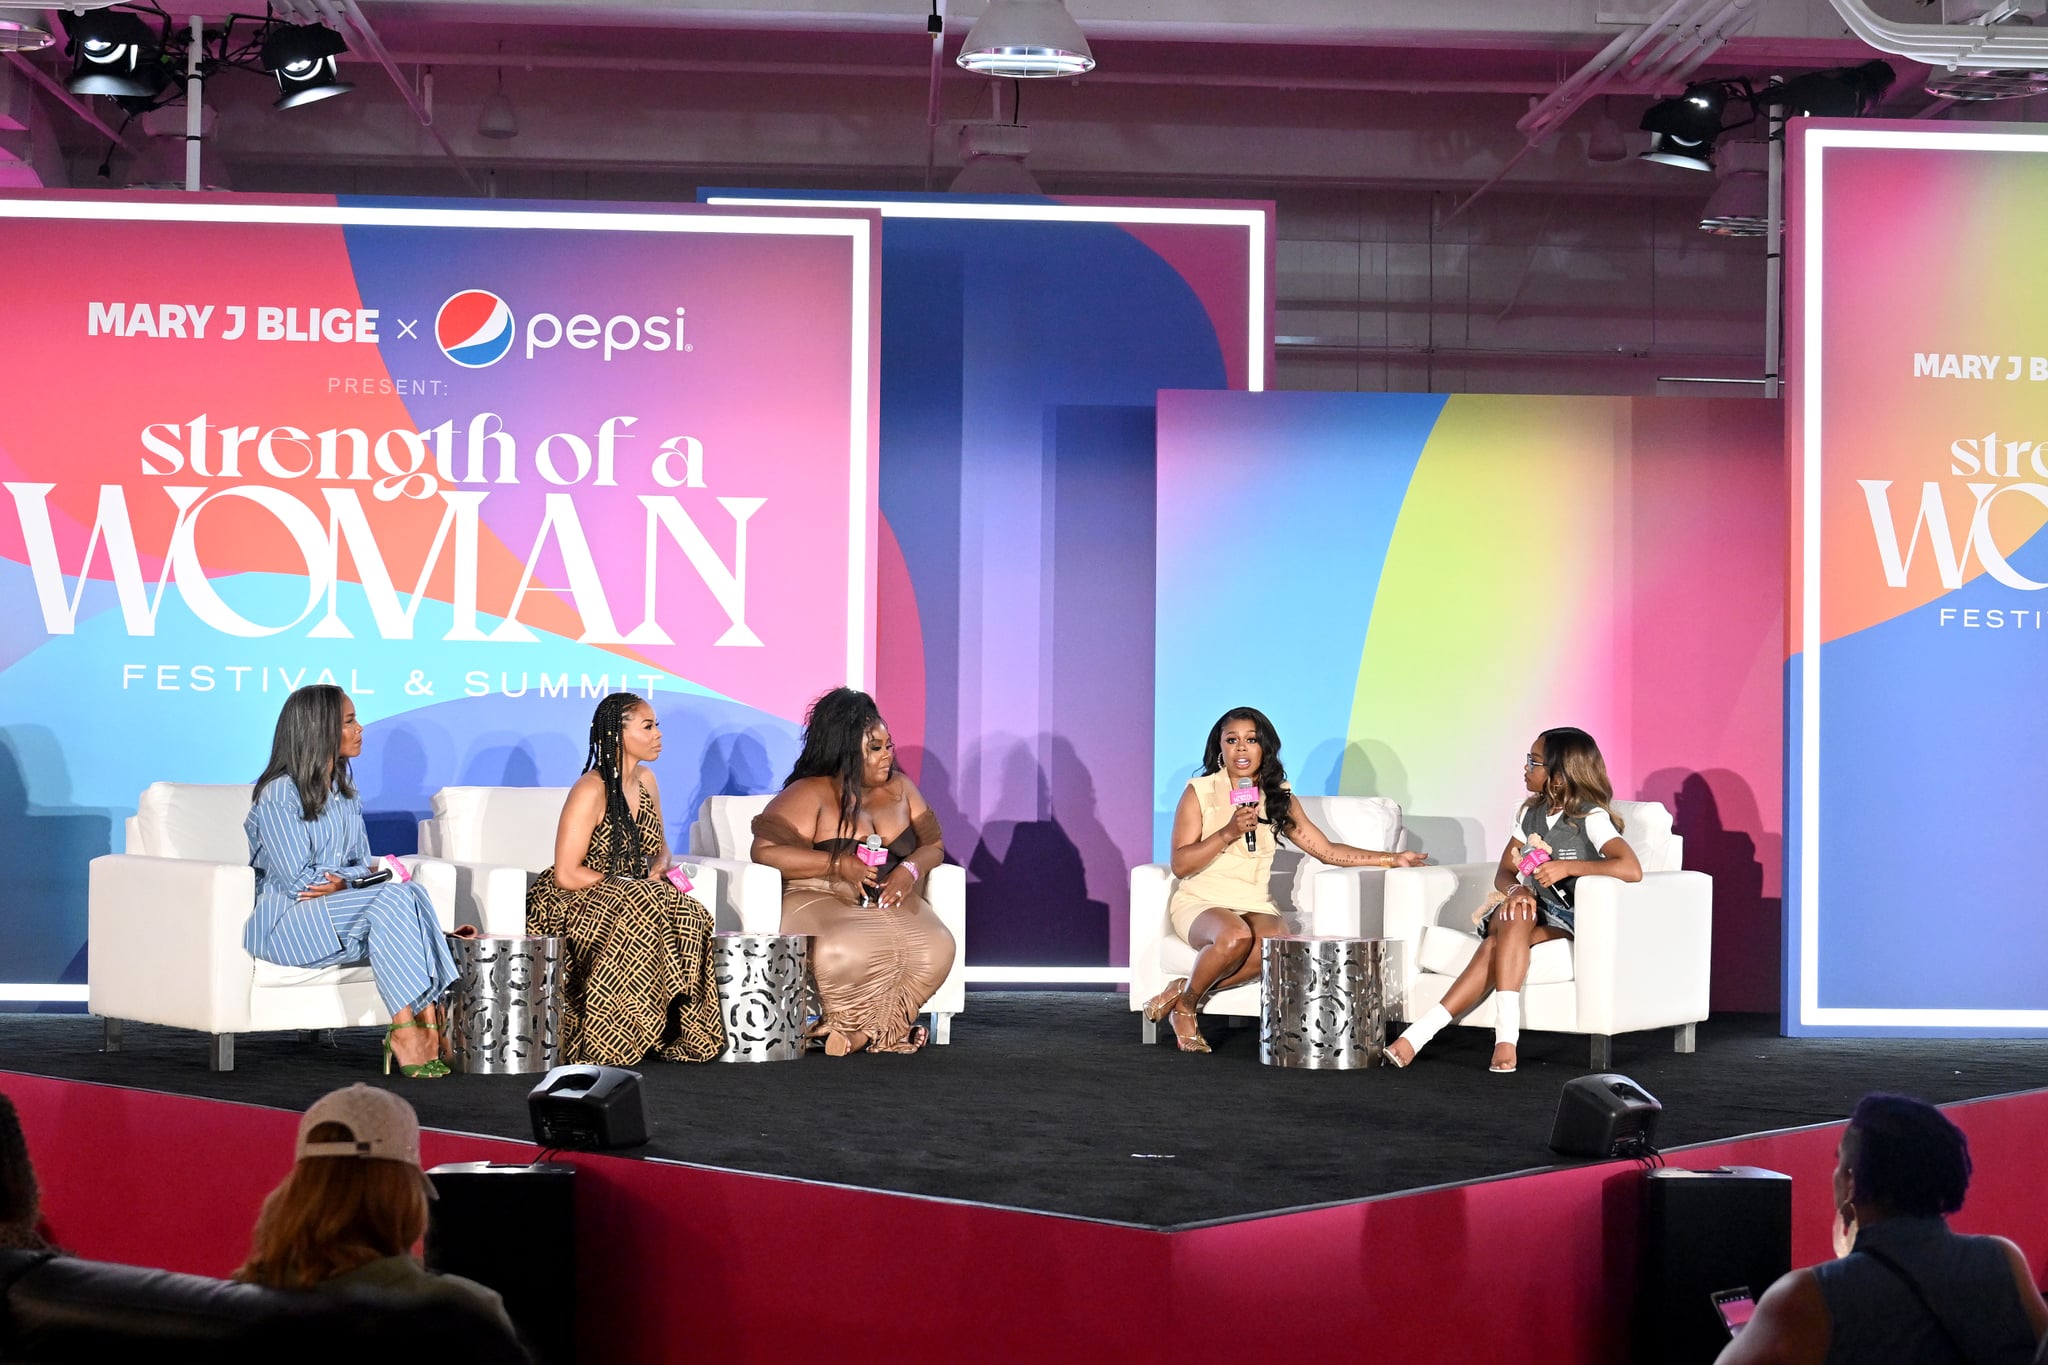 ATLANTA, GEORGIA - MAY 13: (L-R) Mara Brock Akil, Brandee Evans, Raven Goodwin, Gail Bean and Marsai Martin speak onstage during the Women's Power Summit in association with Mary J. Blige, Pepsi and Live Nation Urban at AmericasMart Atlanta on May 13, 2023 in Atlanta, Georgia.  (Photo by Paras Griffin/Getty Images for Strength Of A Woman festival and summit)